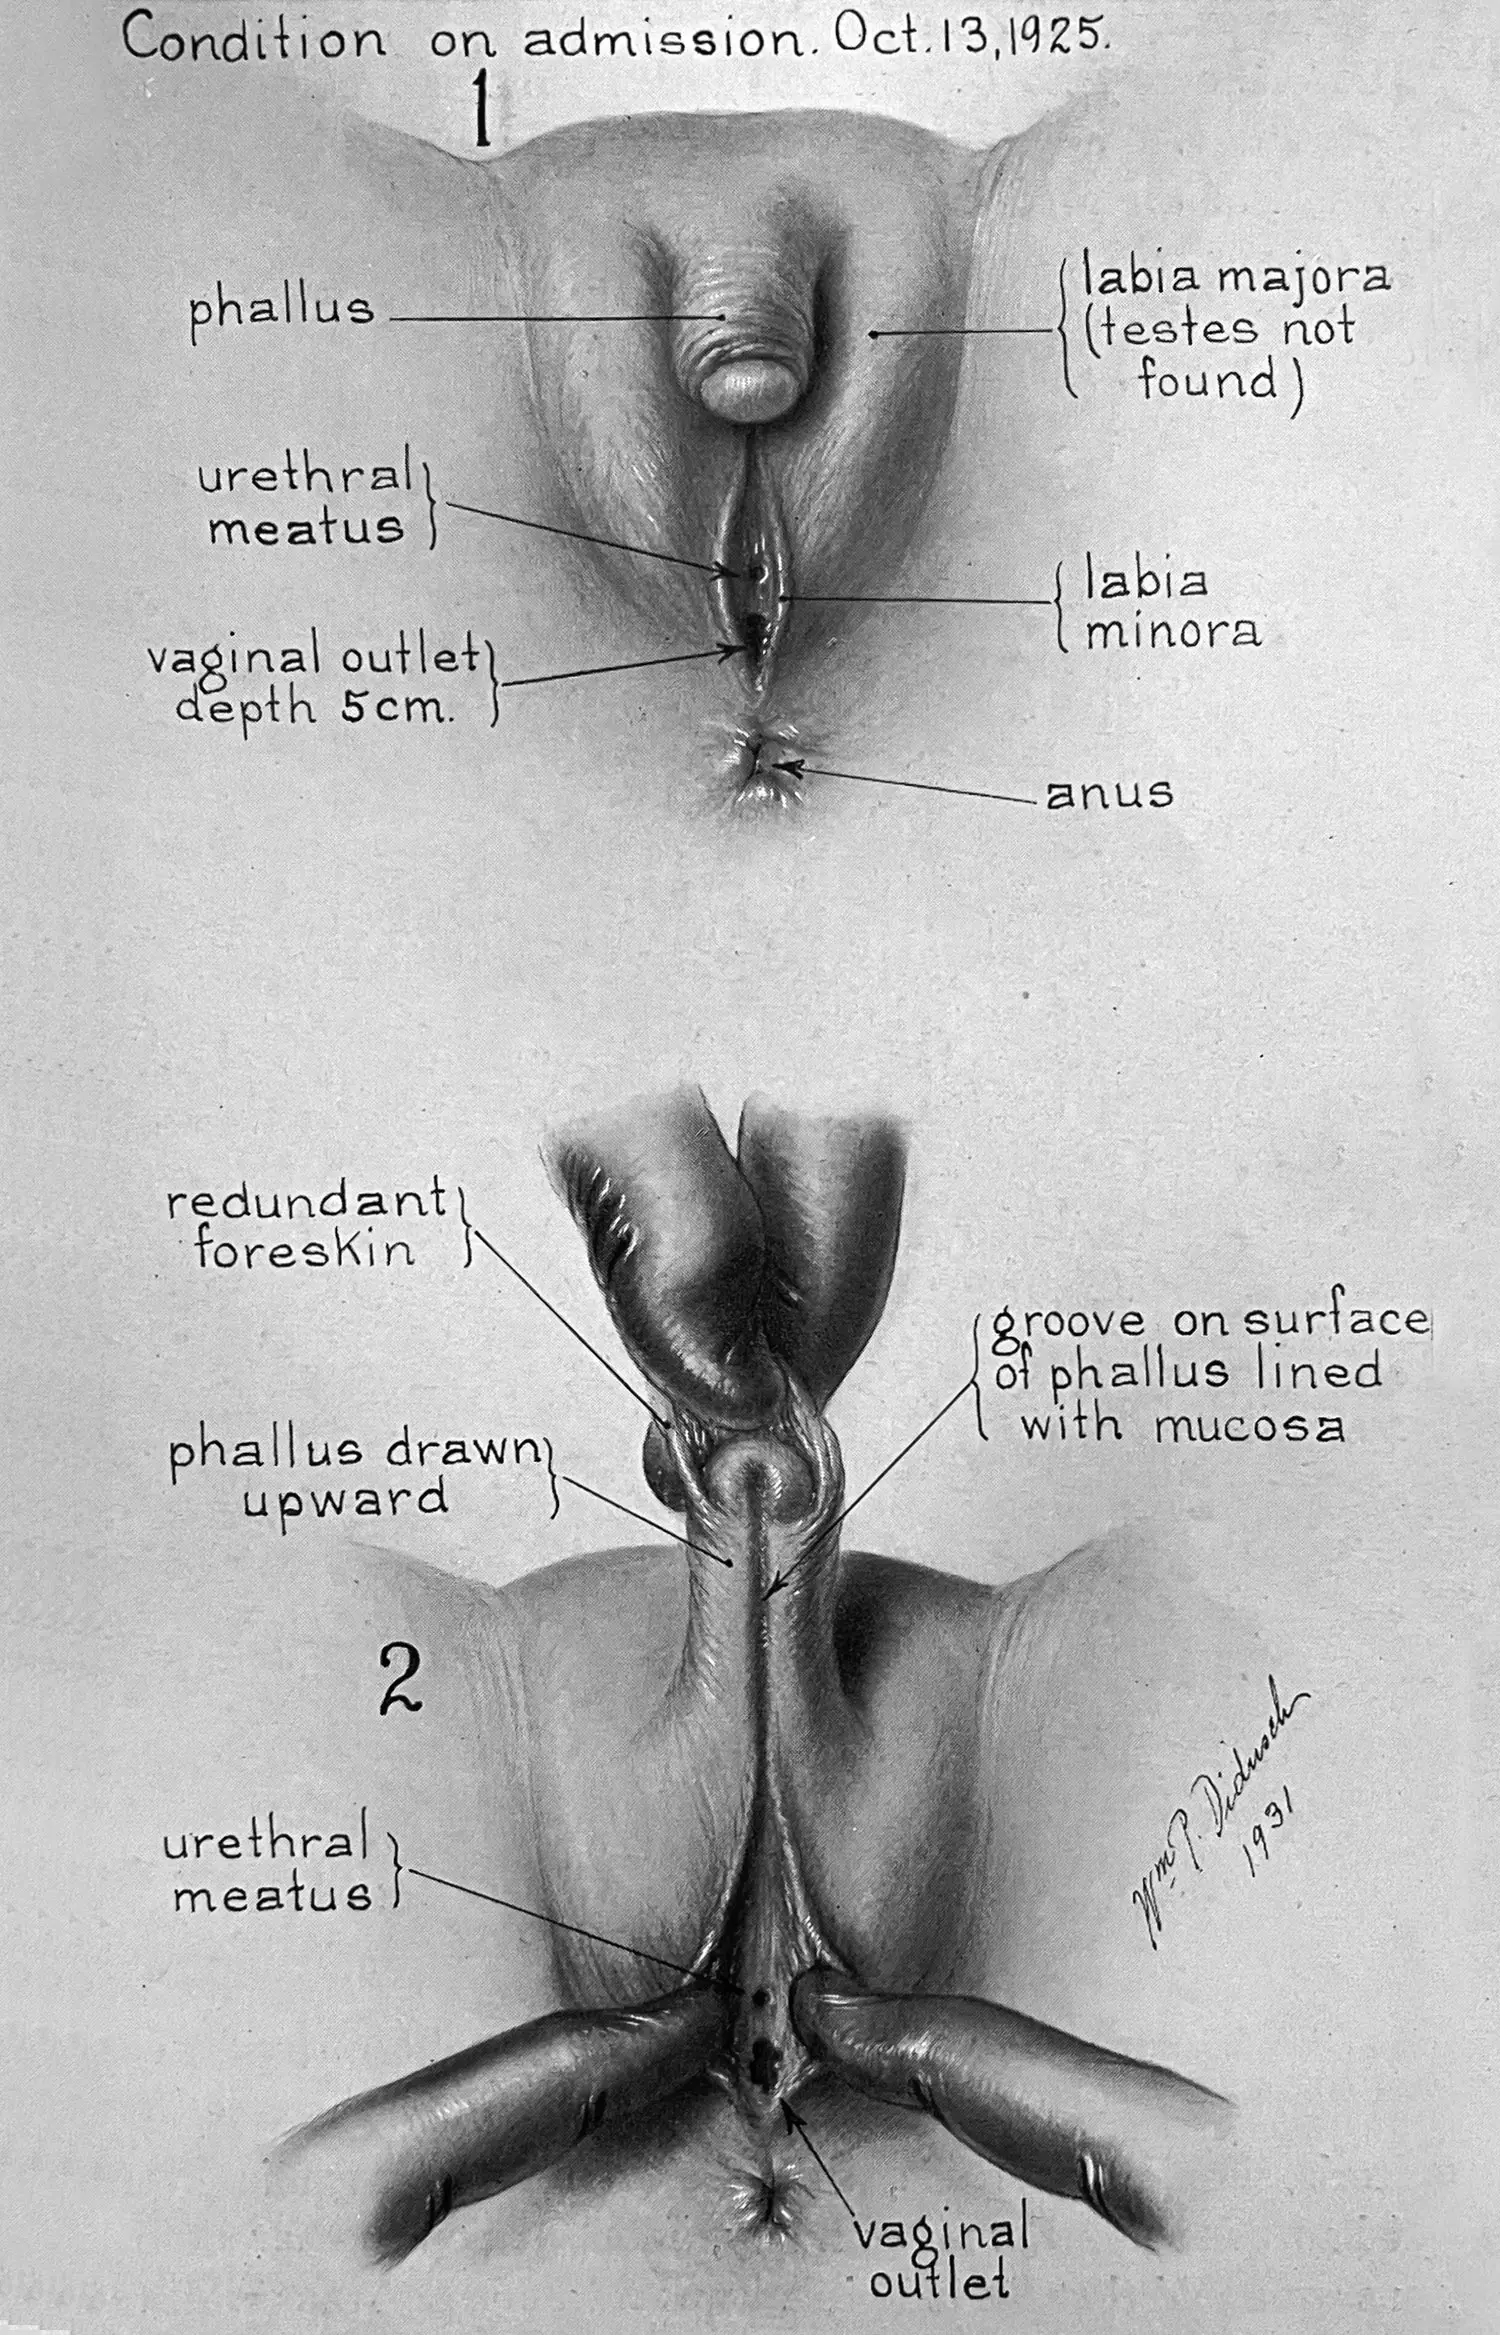 Two-part medical illustration titled “Condition on admission, Oct. 13, 1925” shows two views of the patient’s genitalia. Annotations point to the “phallus,” “vaginal outlet,” and “labia majora (testes not found)” among others.